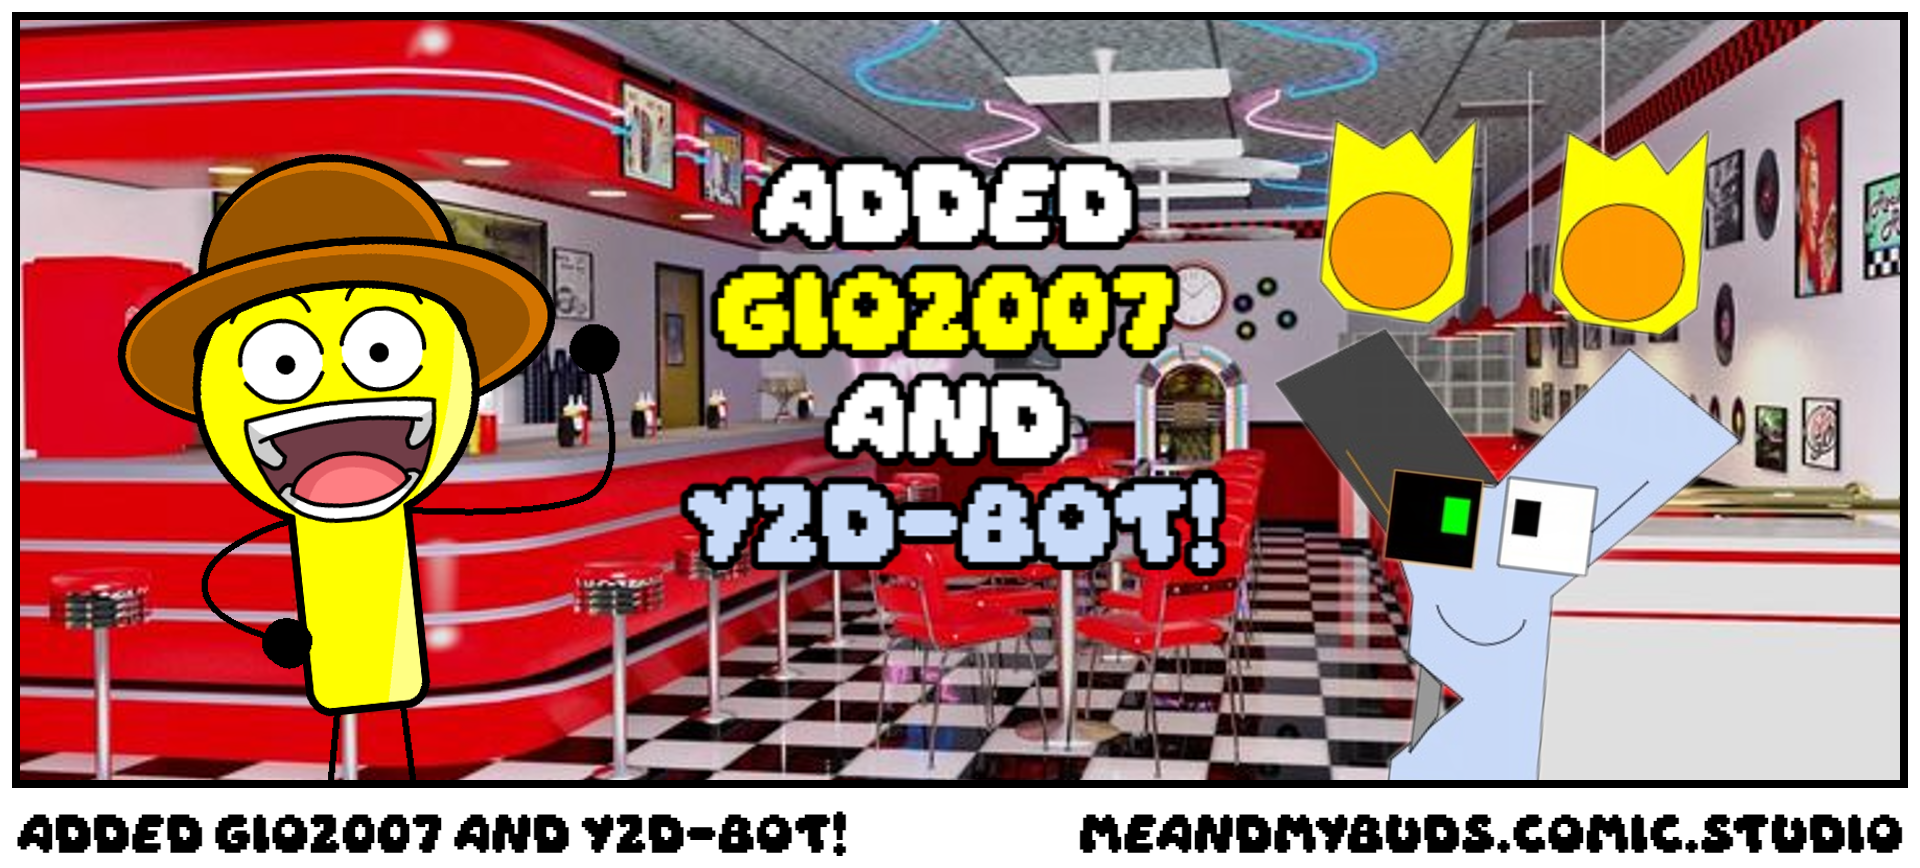 Added Gio2007 and Y2D-BOT!